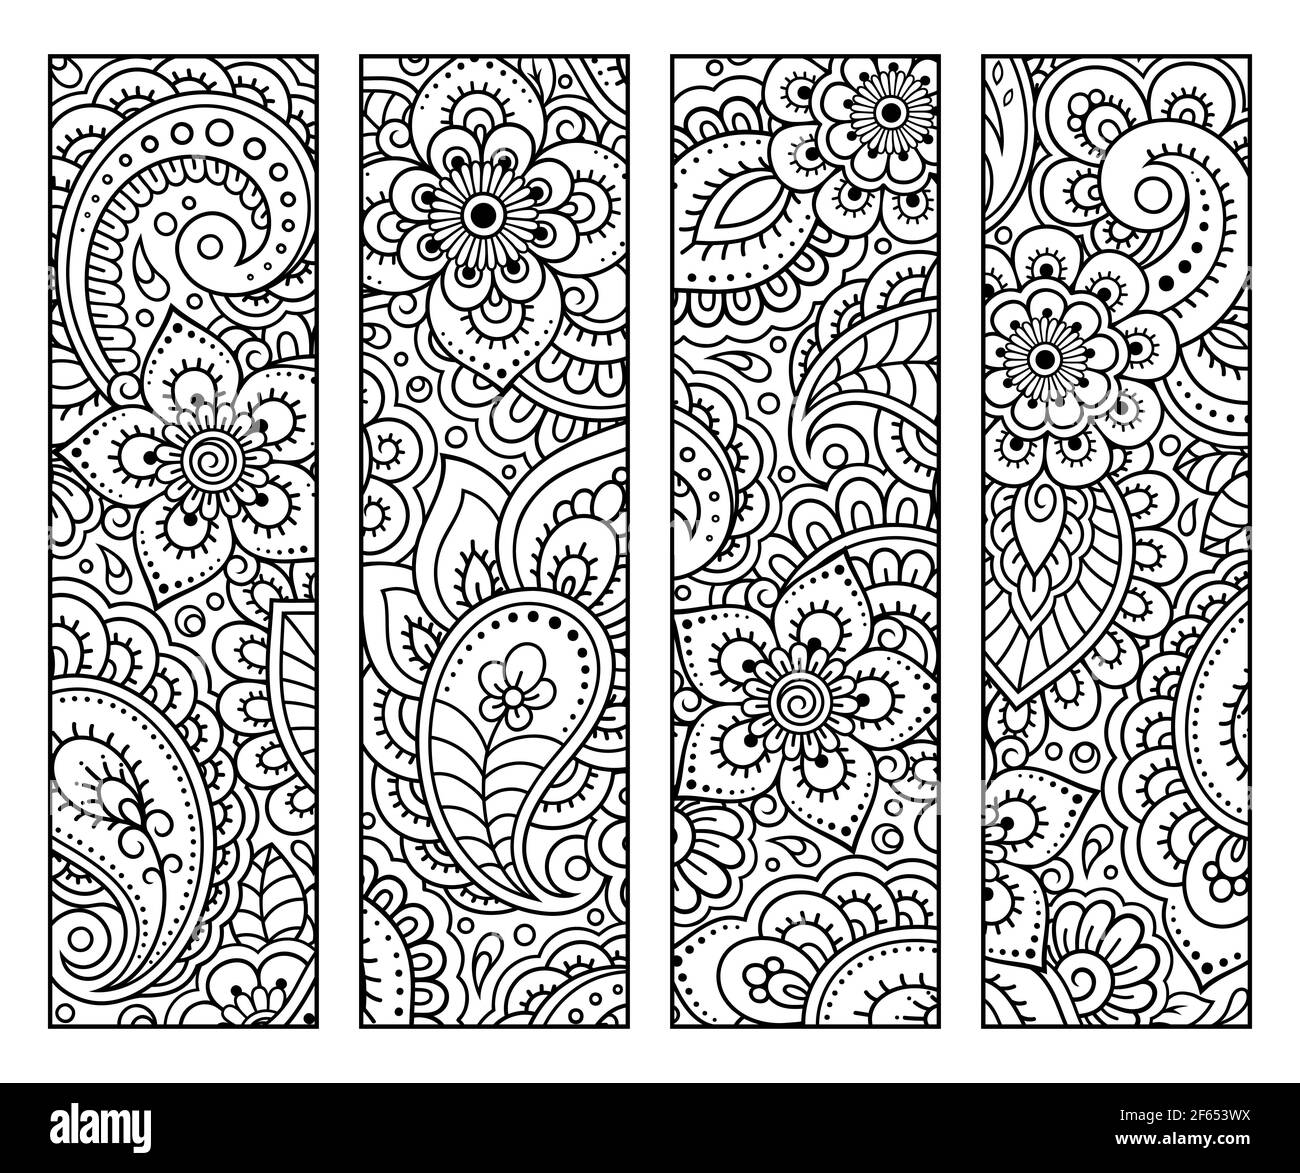 Retro Geometric Pattern Coloring Book: Creativity Nostalgic Coloring Pages  With Incredible Vintage-Inspired Patterns Illustrations Mind Blowing